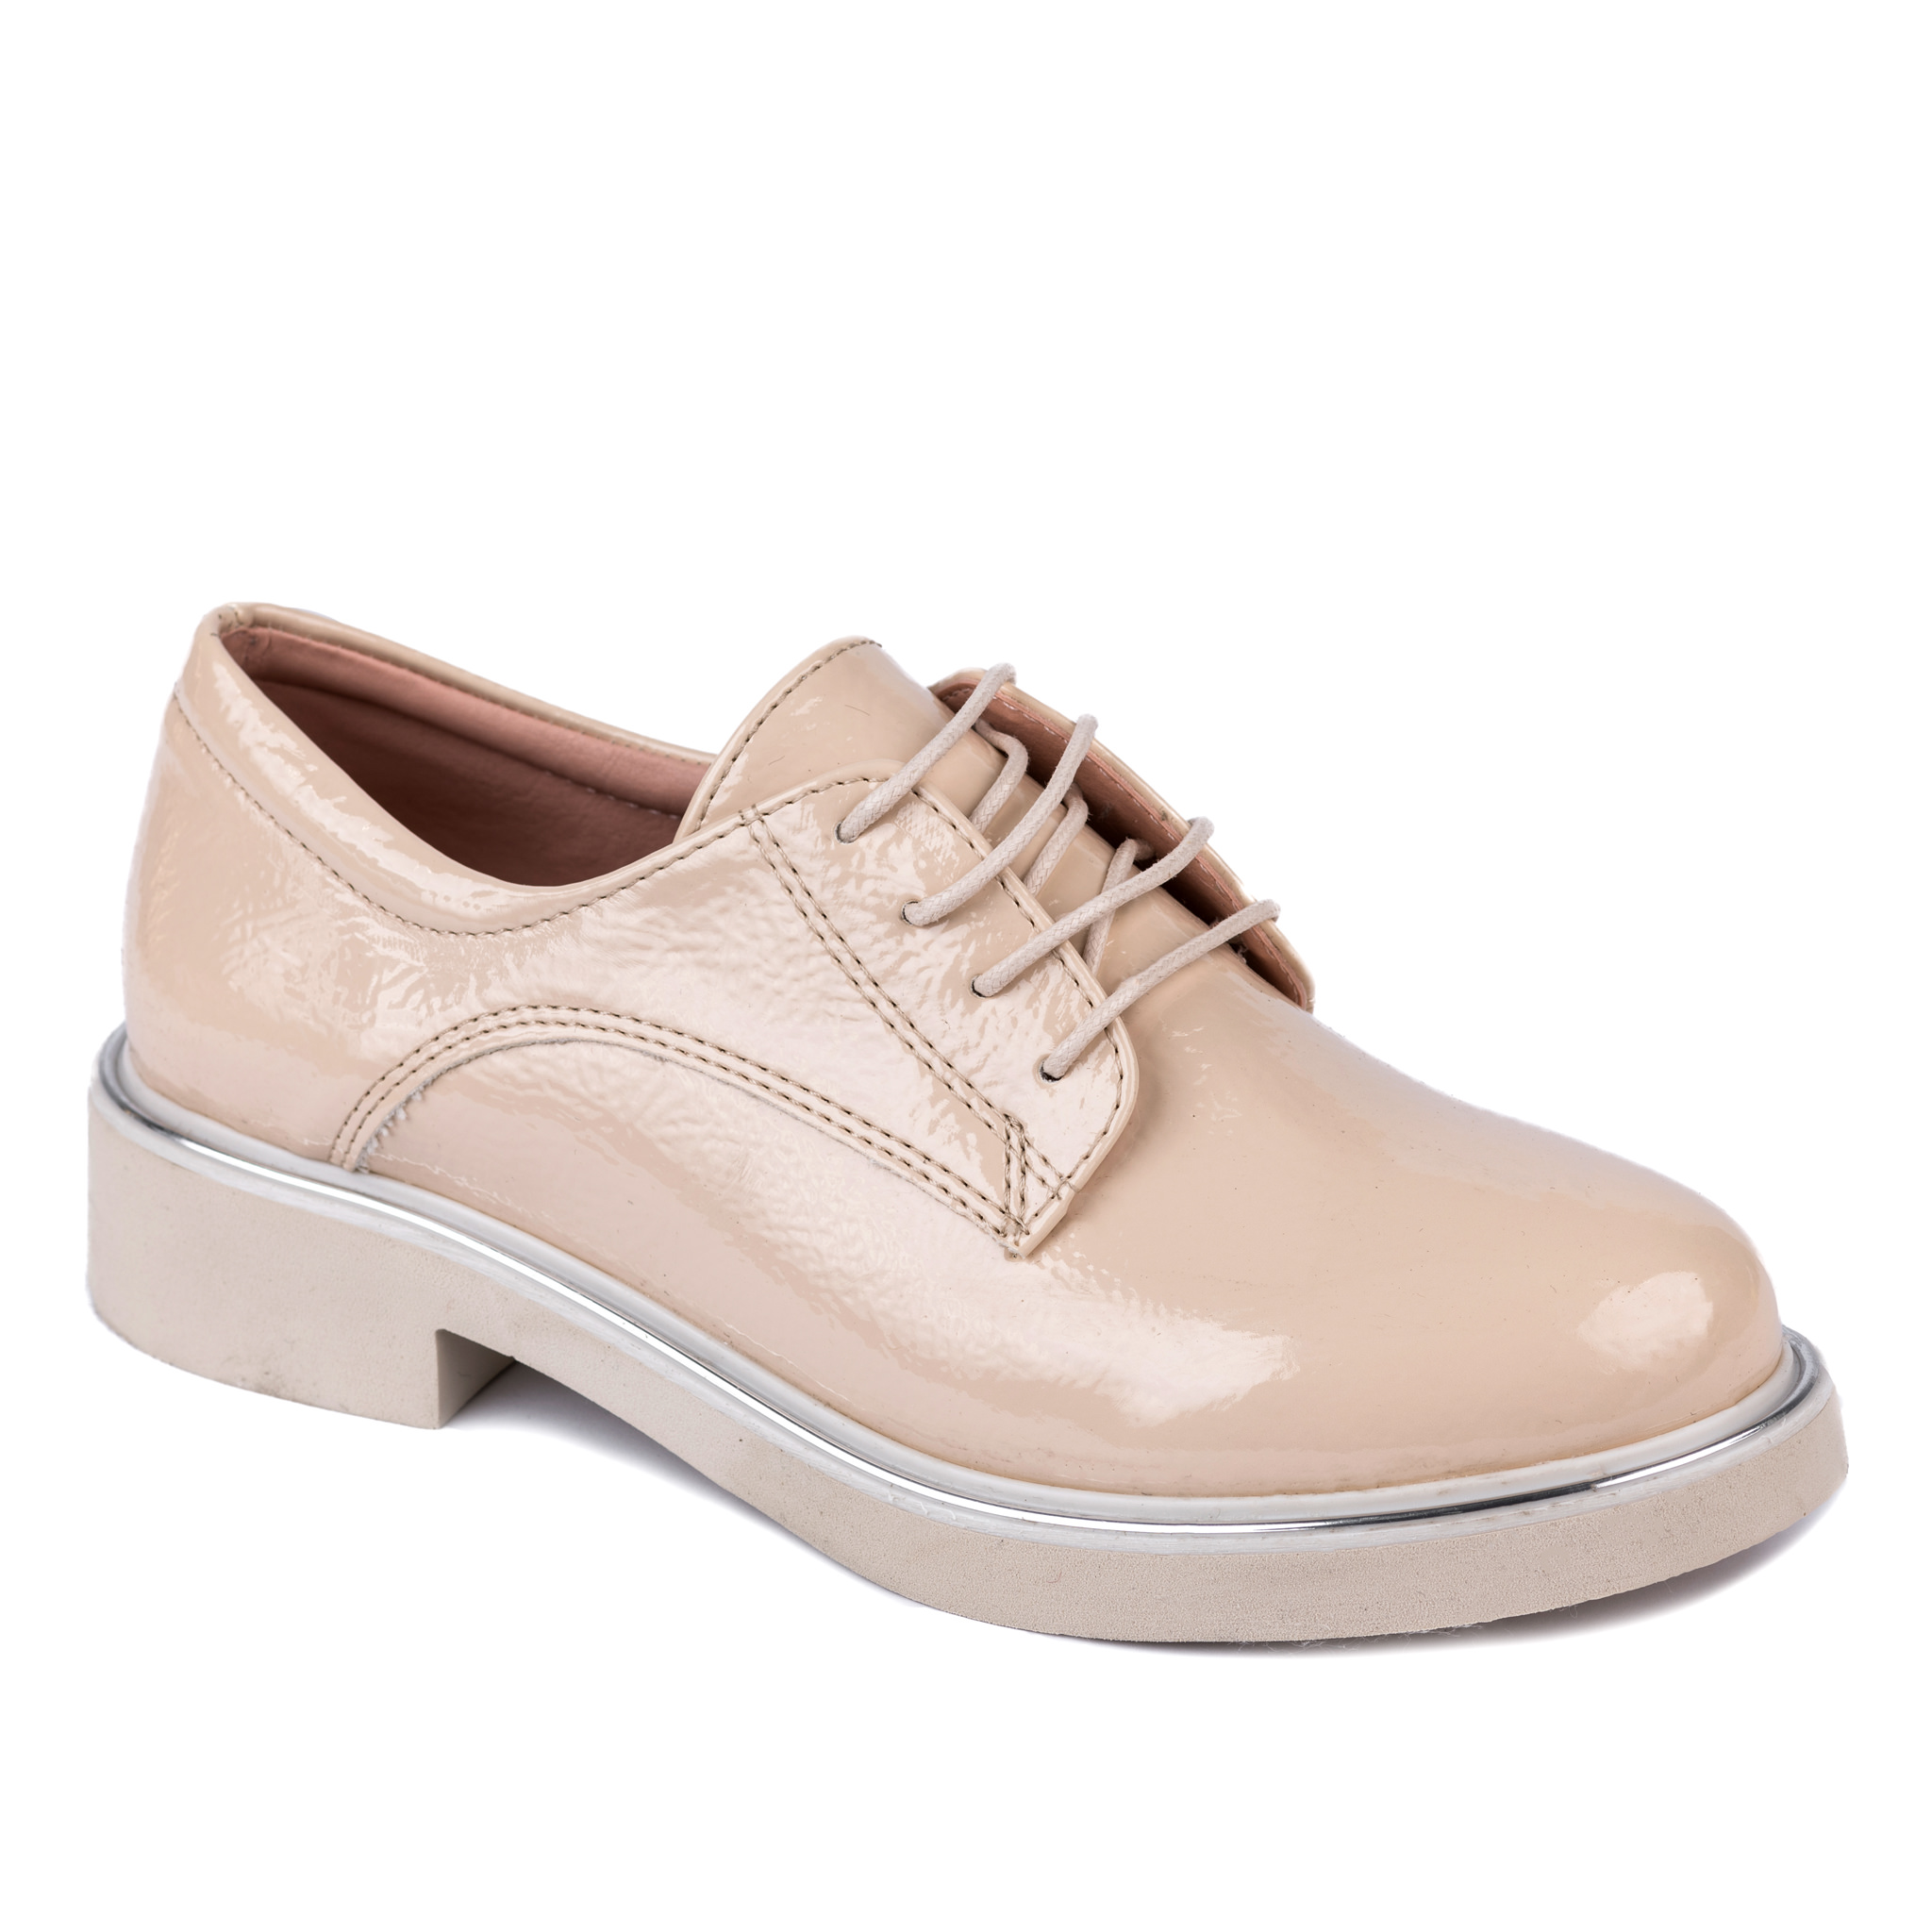 OXFORD SHOES - BEIGE